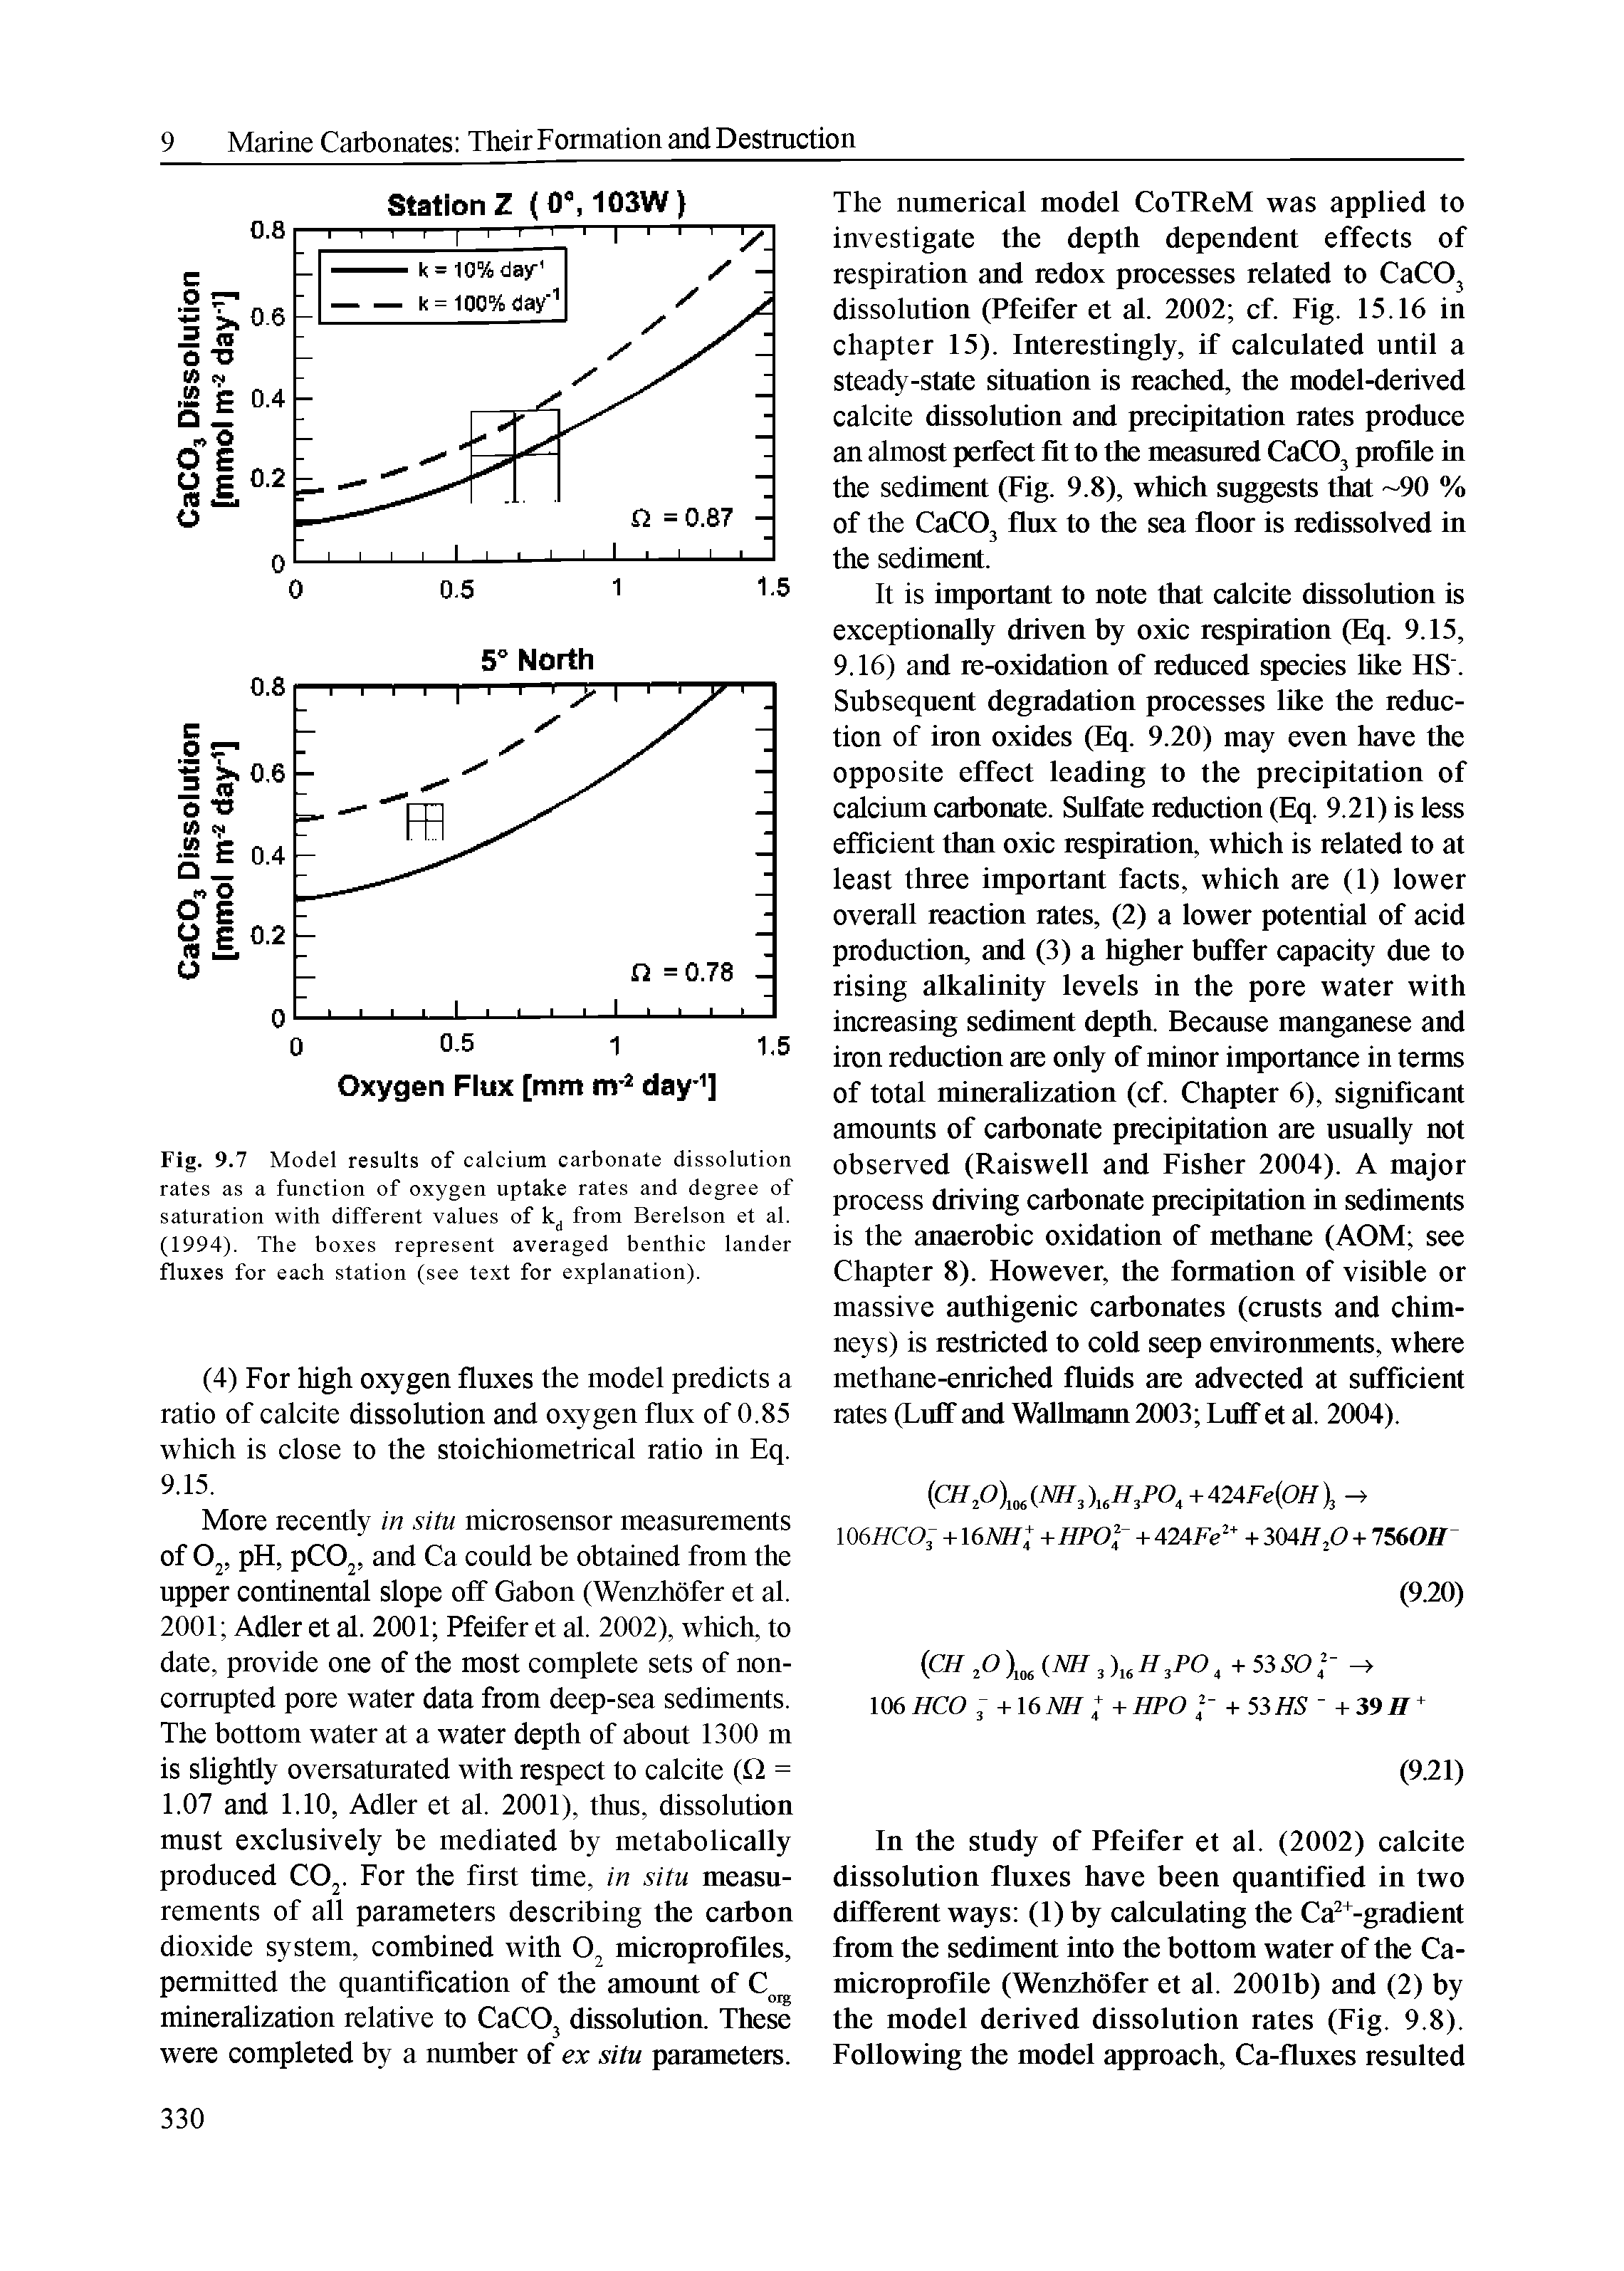 Fig. 9.7 Model results of calcium carbonate dissolution rates as a function of oxygen uptake rates and degree of saturation with different values of from Berelson et al. (1994). The boxes represent averaged benthic lander fluxes for each station (see text for explanation).